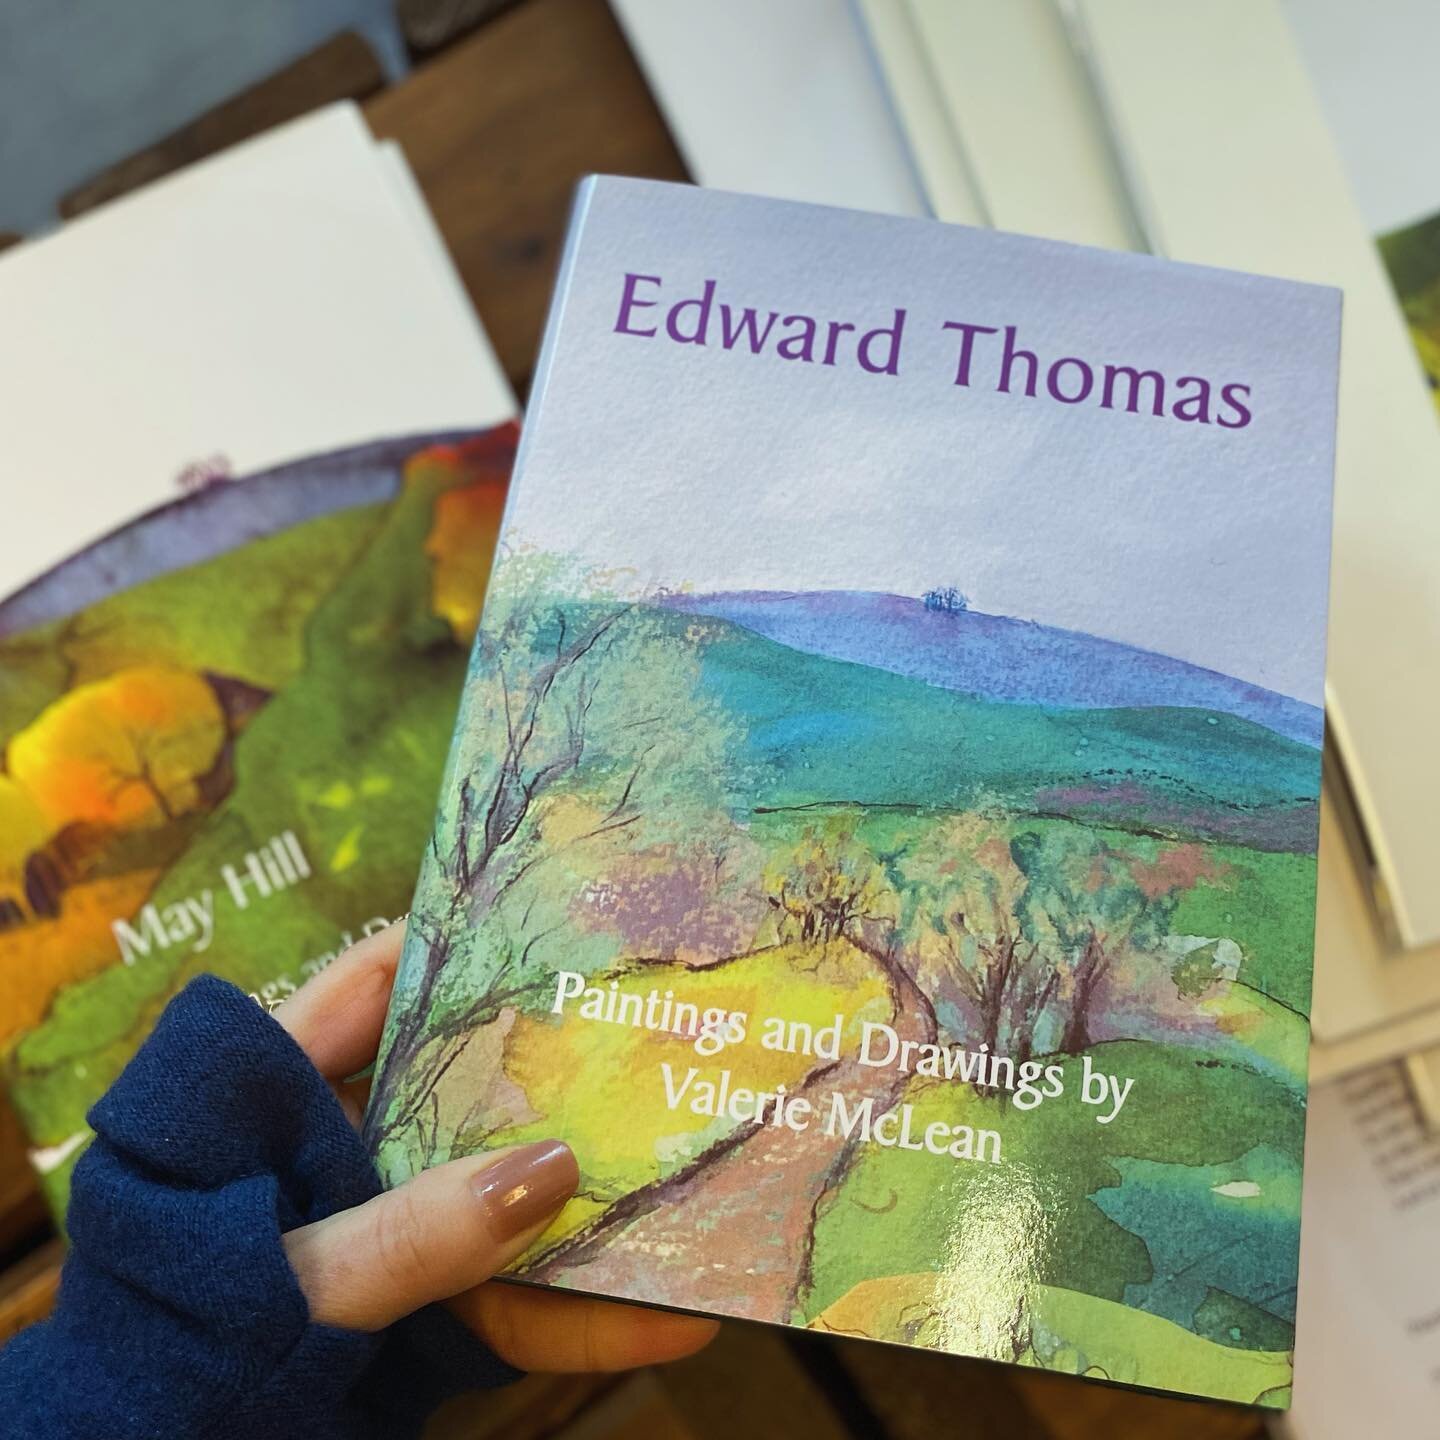 A book of Edward Thomas&rsquo; poems together with prose extracts from In Pursuit of Spring and The South Country. 

The lavished illustrations are paintings, drawings and collages, mainly sketchbook pages made whilst walking in the countryside or fr